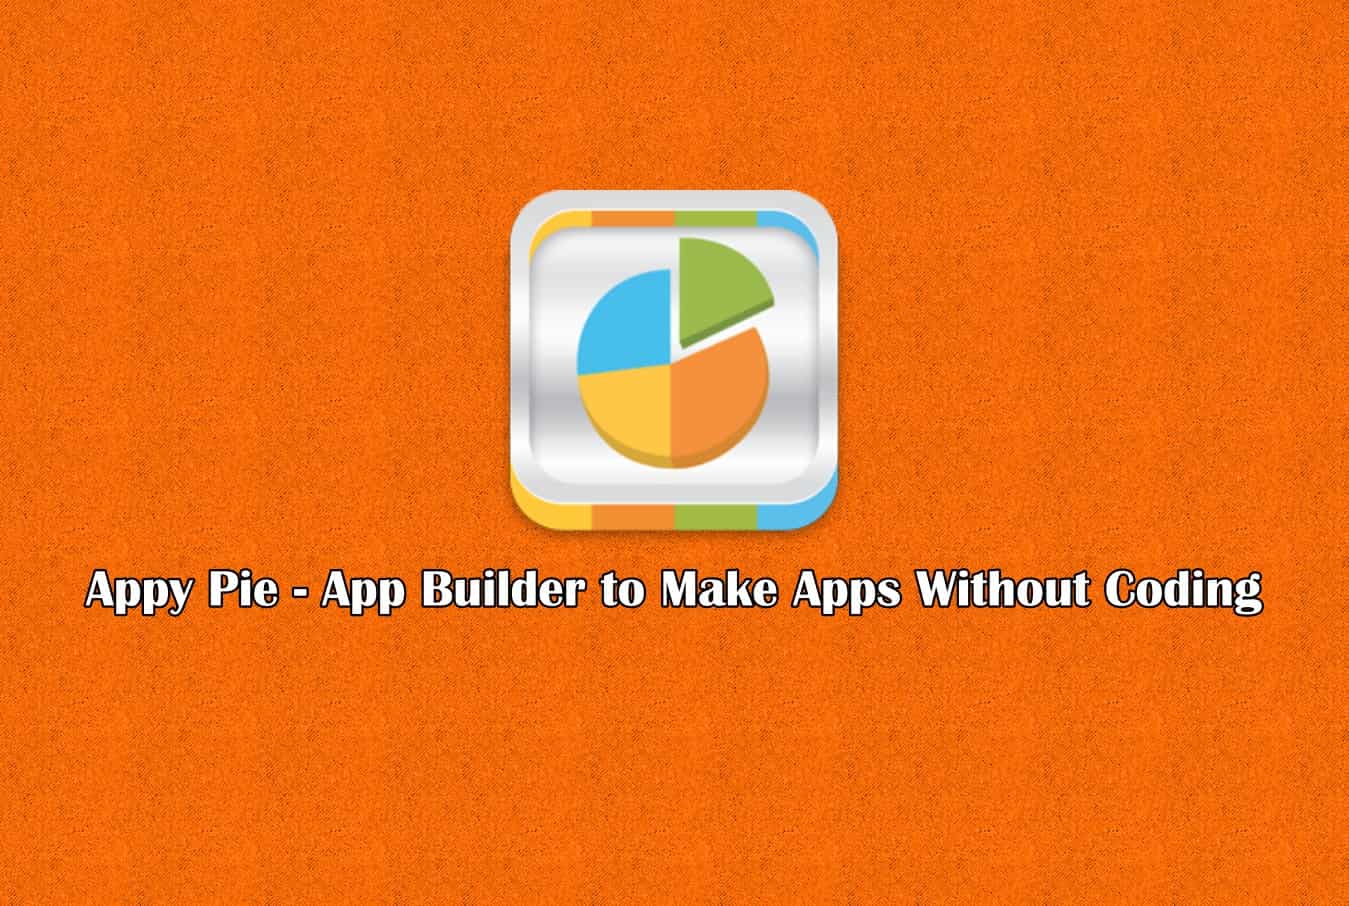 Mobile app building is simple and affordable – the Appy Pie way!